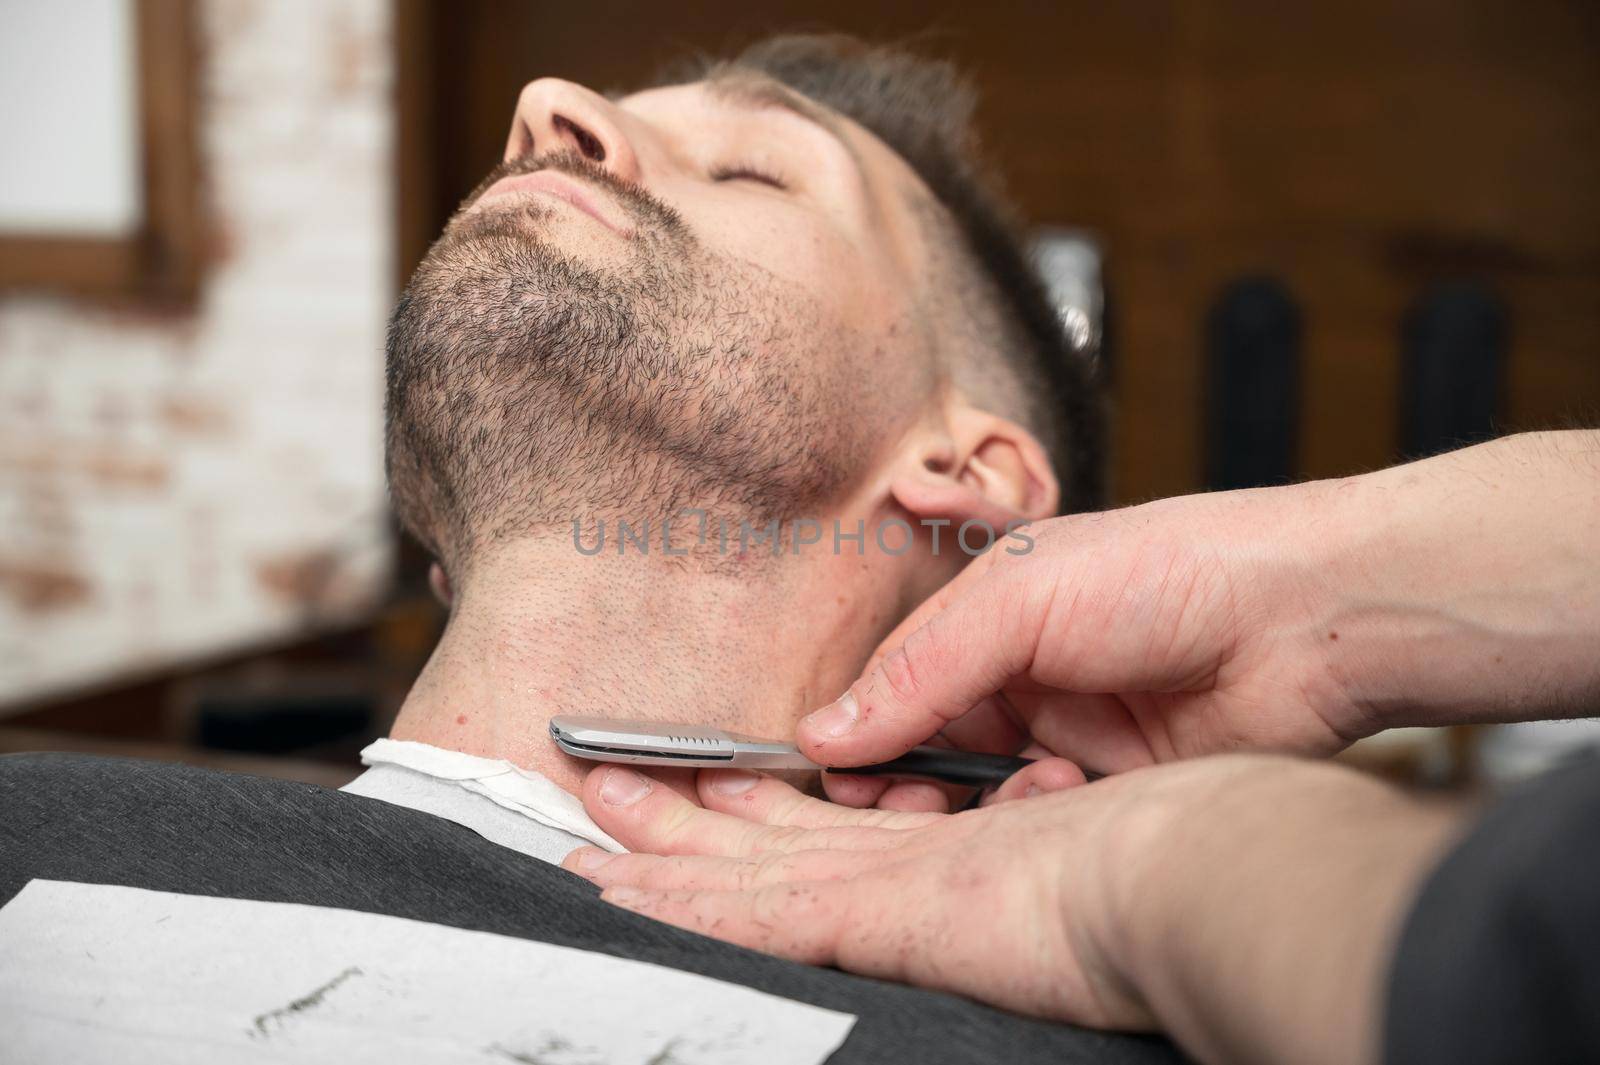 Barber shaving bearded male with a sharp razor. High quality photography